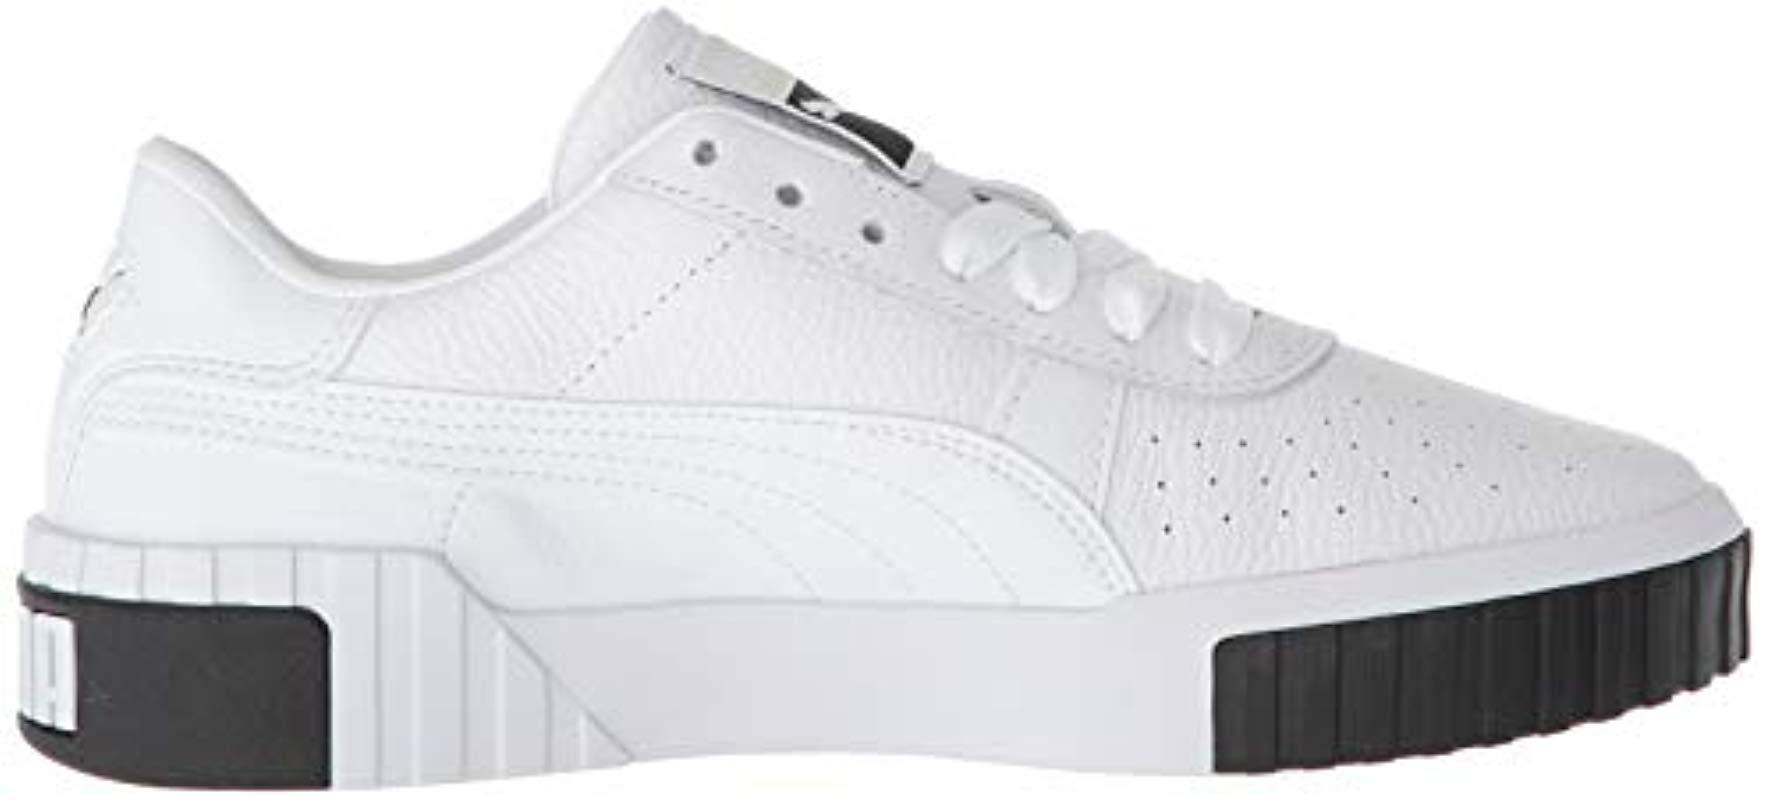 PUMA Leather Cali Training Shoes in White/Black (White) - Save 54% - Lyst